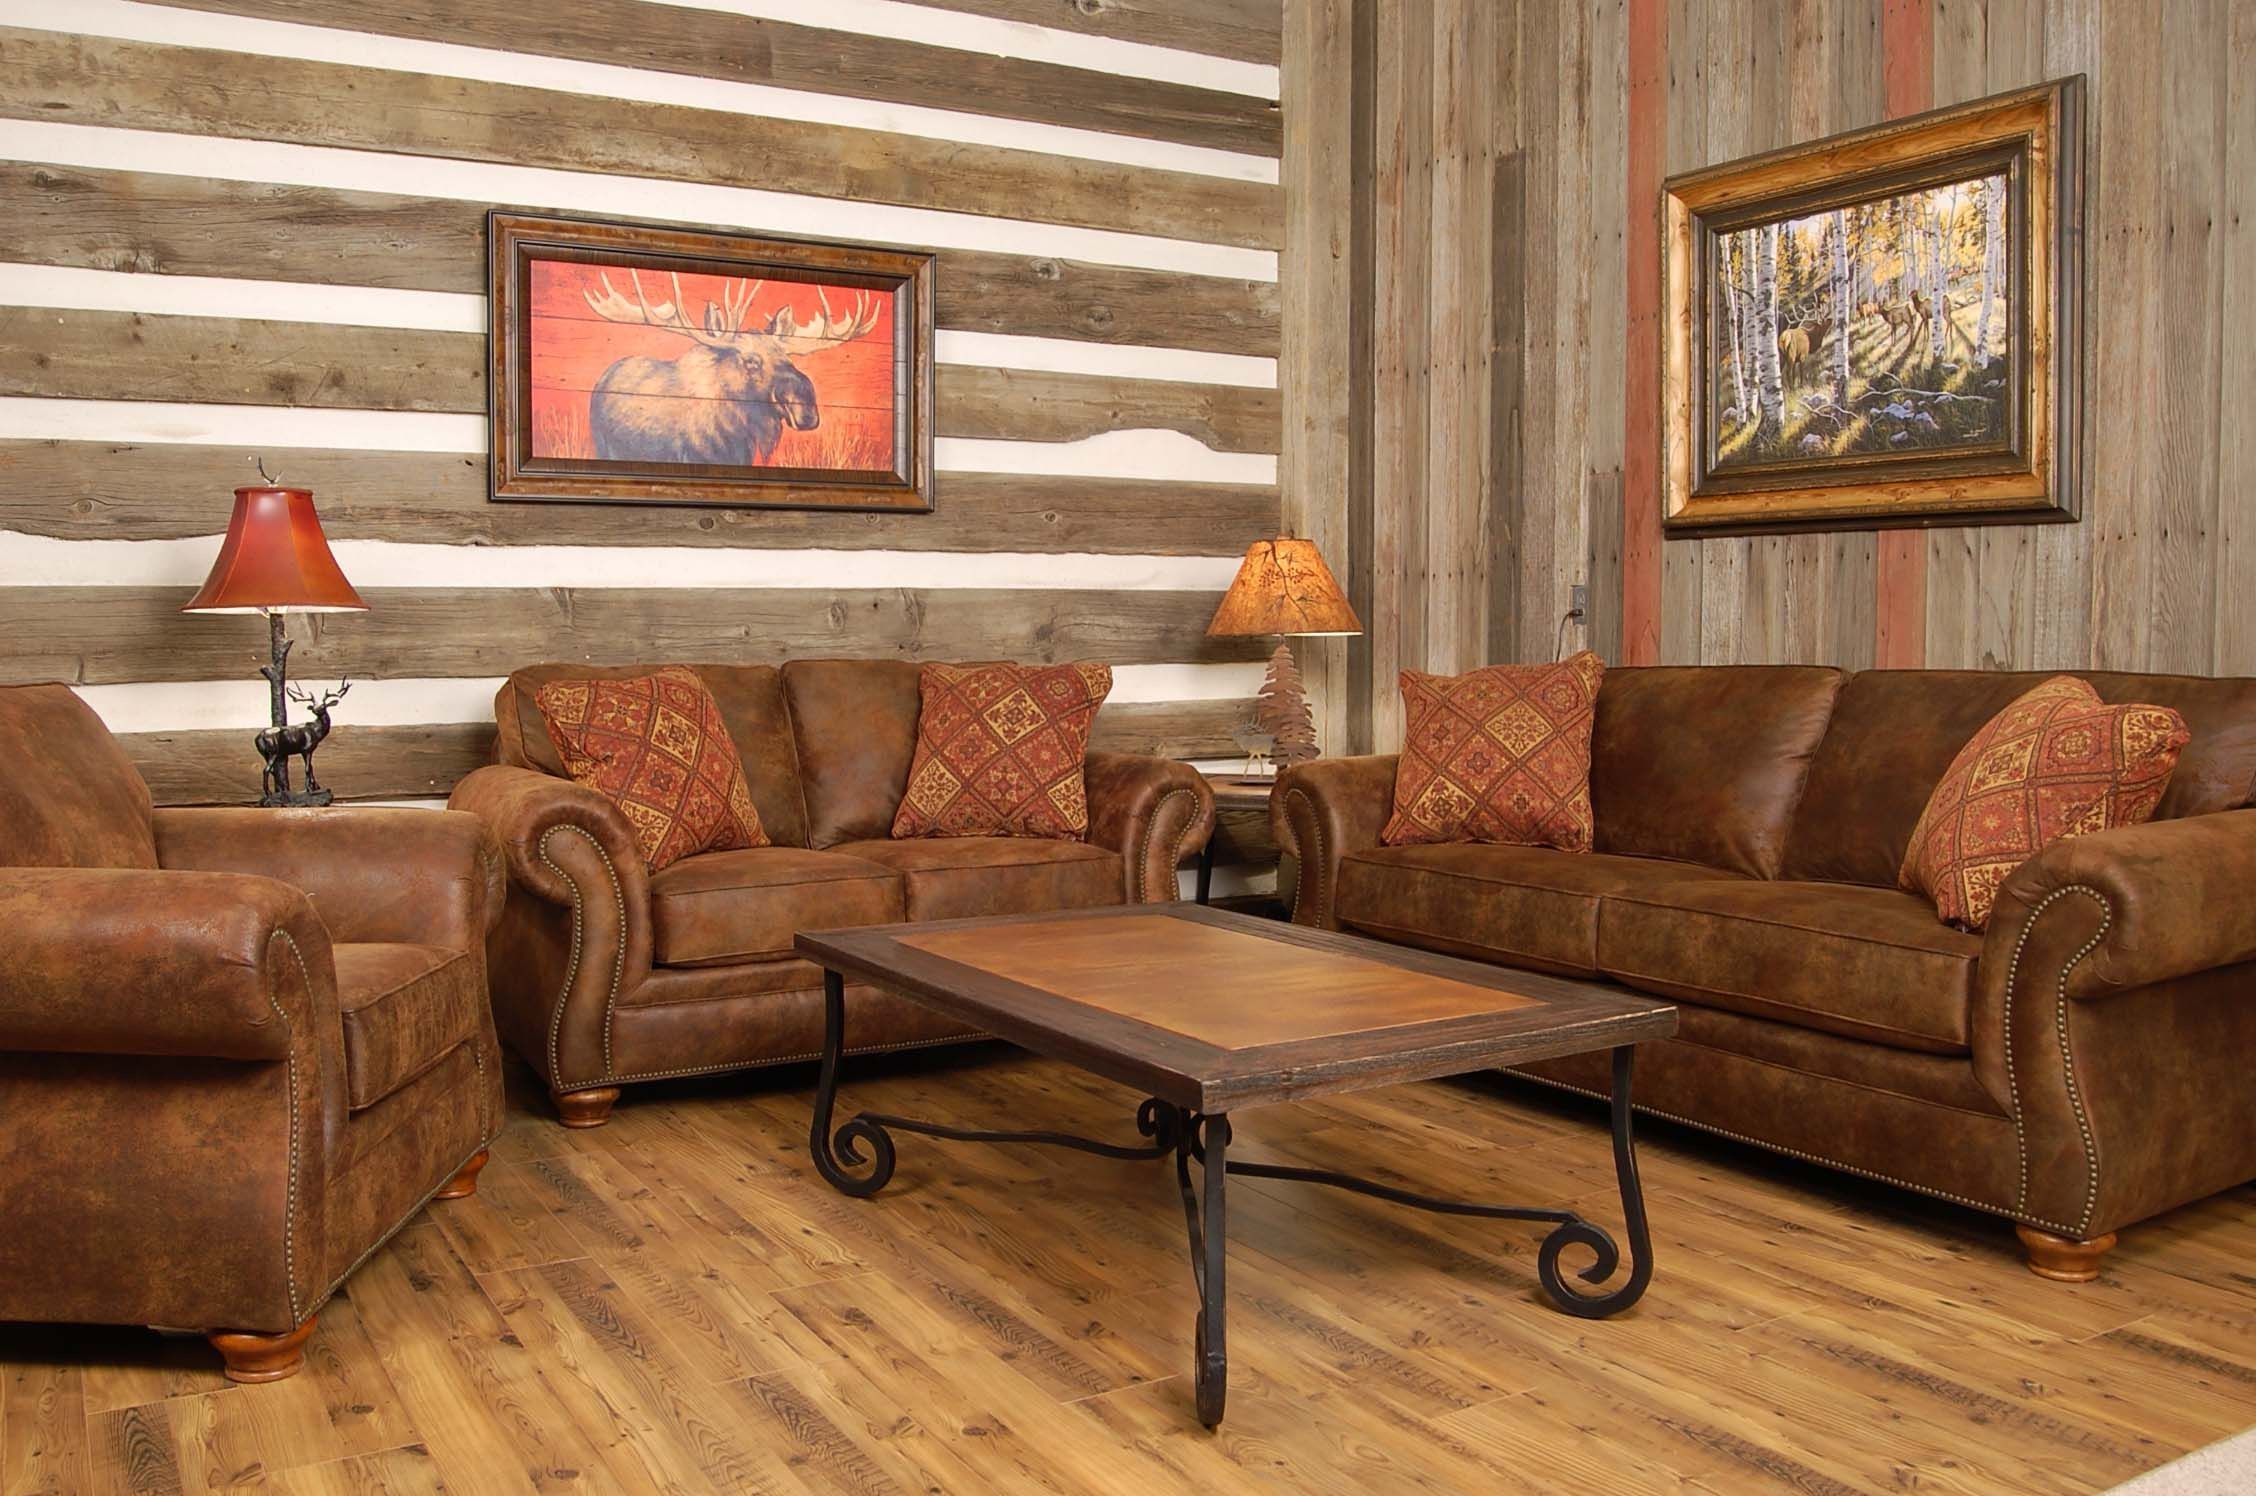 Cool Leather Sofa Set Wallpapers Odd. country home decor ideas. home decor help.